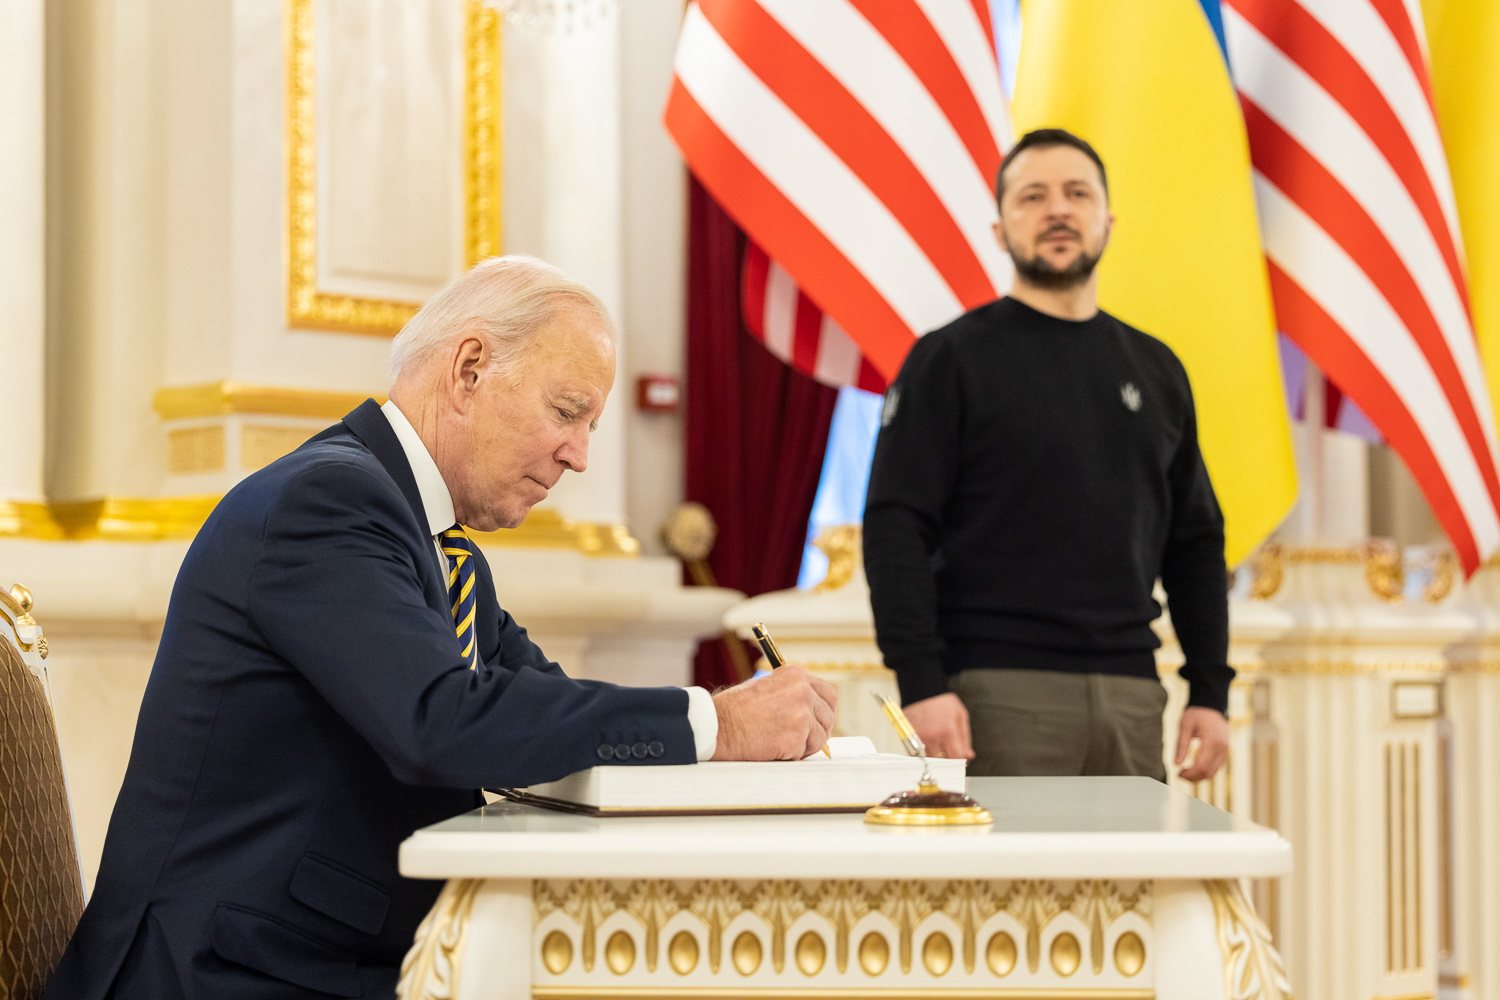 epa10479576 A handout photo made available by the Ukrainian Presidential Press Service on 20 February 2023 shows US President Joe Biden (L) signing in a book as Ukrainian President Volodymyr Zelensky (R) looks on, in Kyiv (Kiev), Ukraine, amid Russia&#039;s invasion. The White House announced on 20 February, that US President Biden met with Ukrainian President Zelensky and his team to extended discussions on US support for Ukraine.  EPA/UKRAINIAN PRESIDENTIAL PRESS SERVICE HANDOUT -- MANDATORY CREDIT: UKRAINIAN PRESIDENTIAL PRESS SERVICE -- HANDOUT EDITORIAL USE ONLY/NO SALES